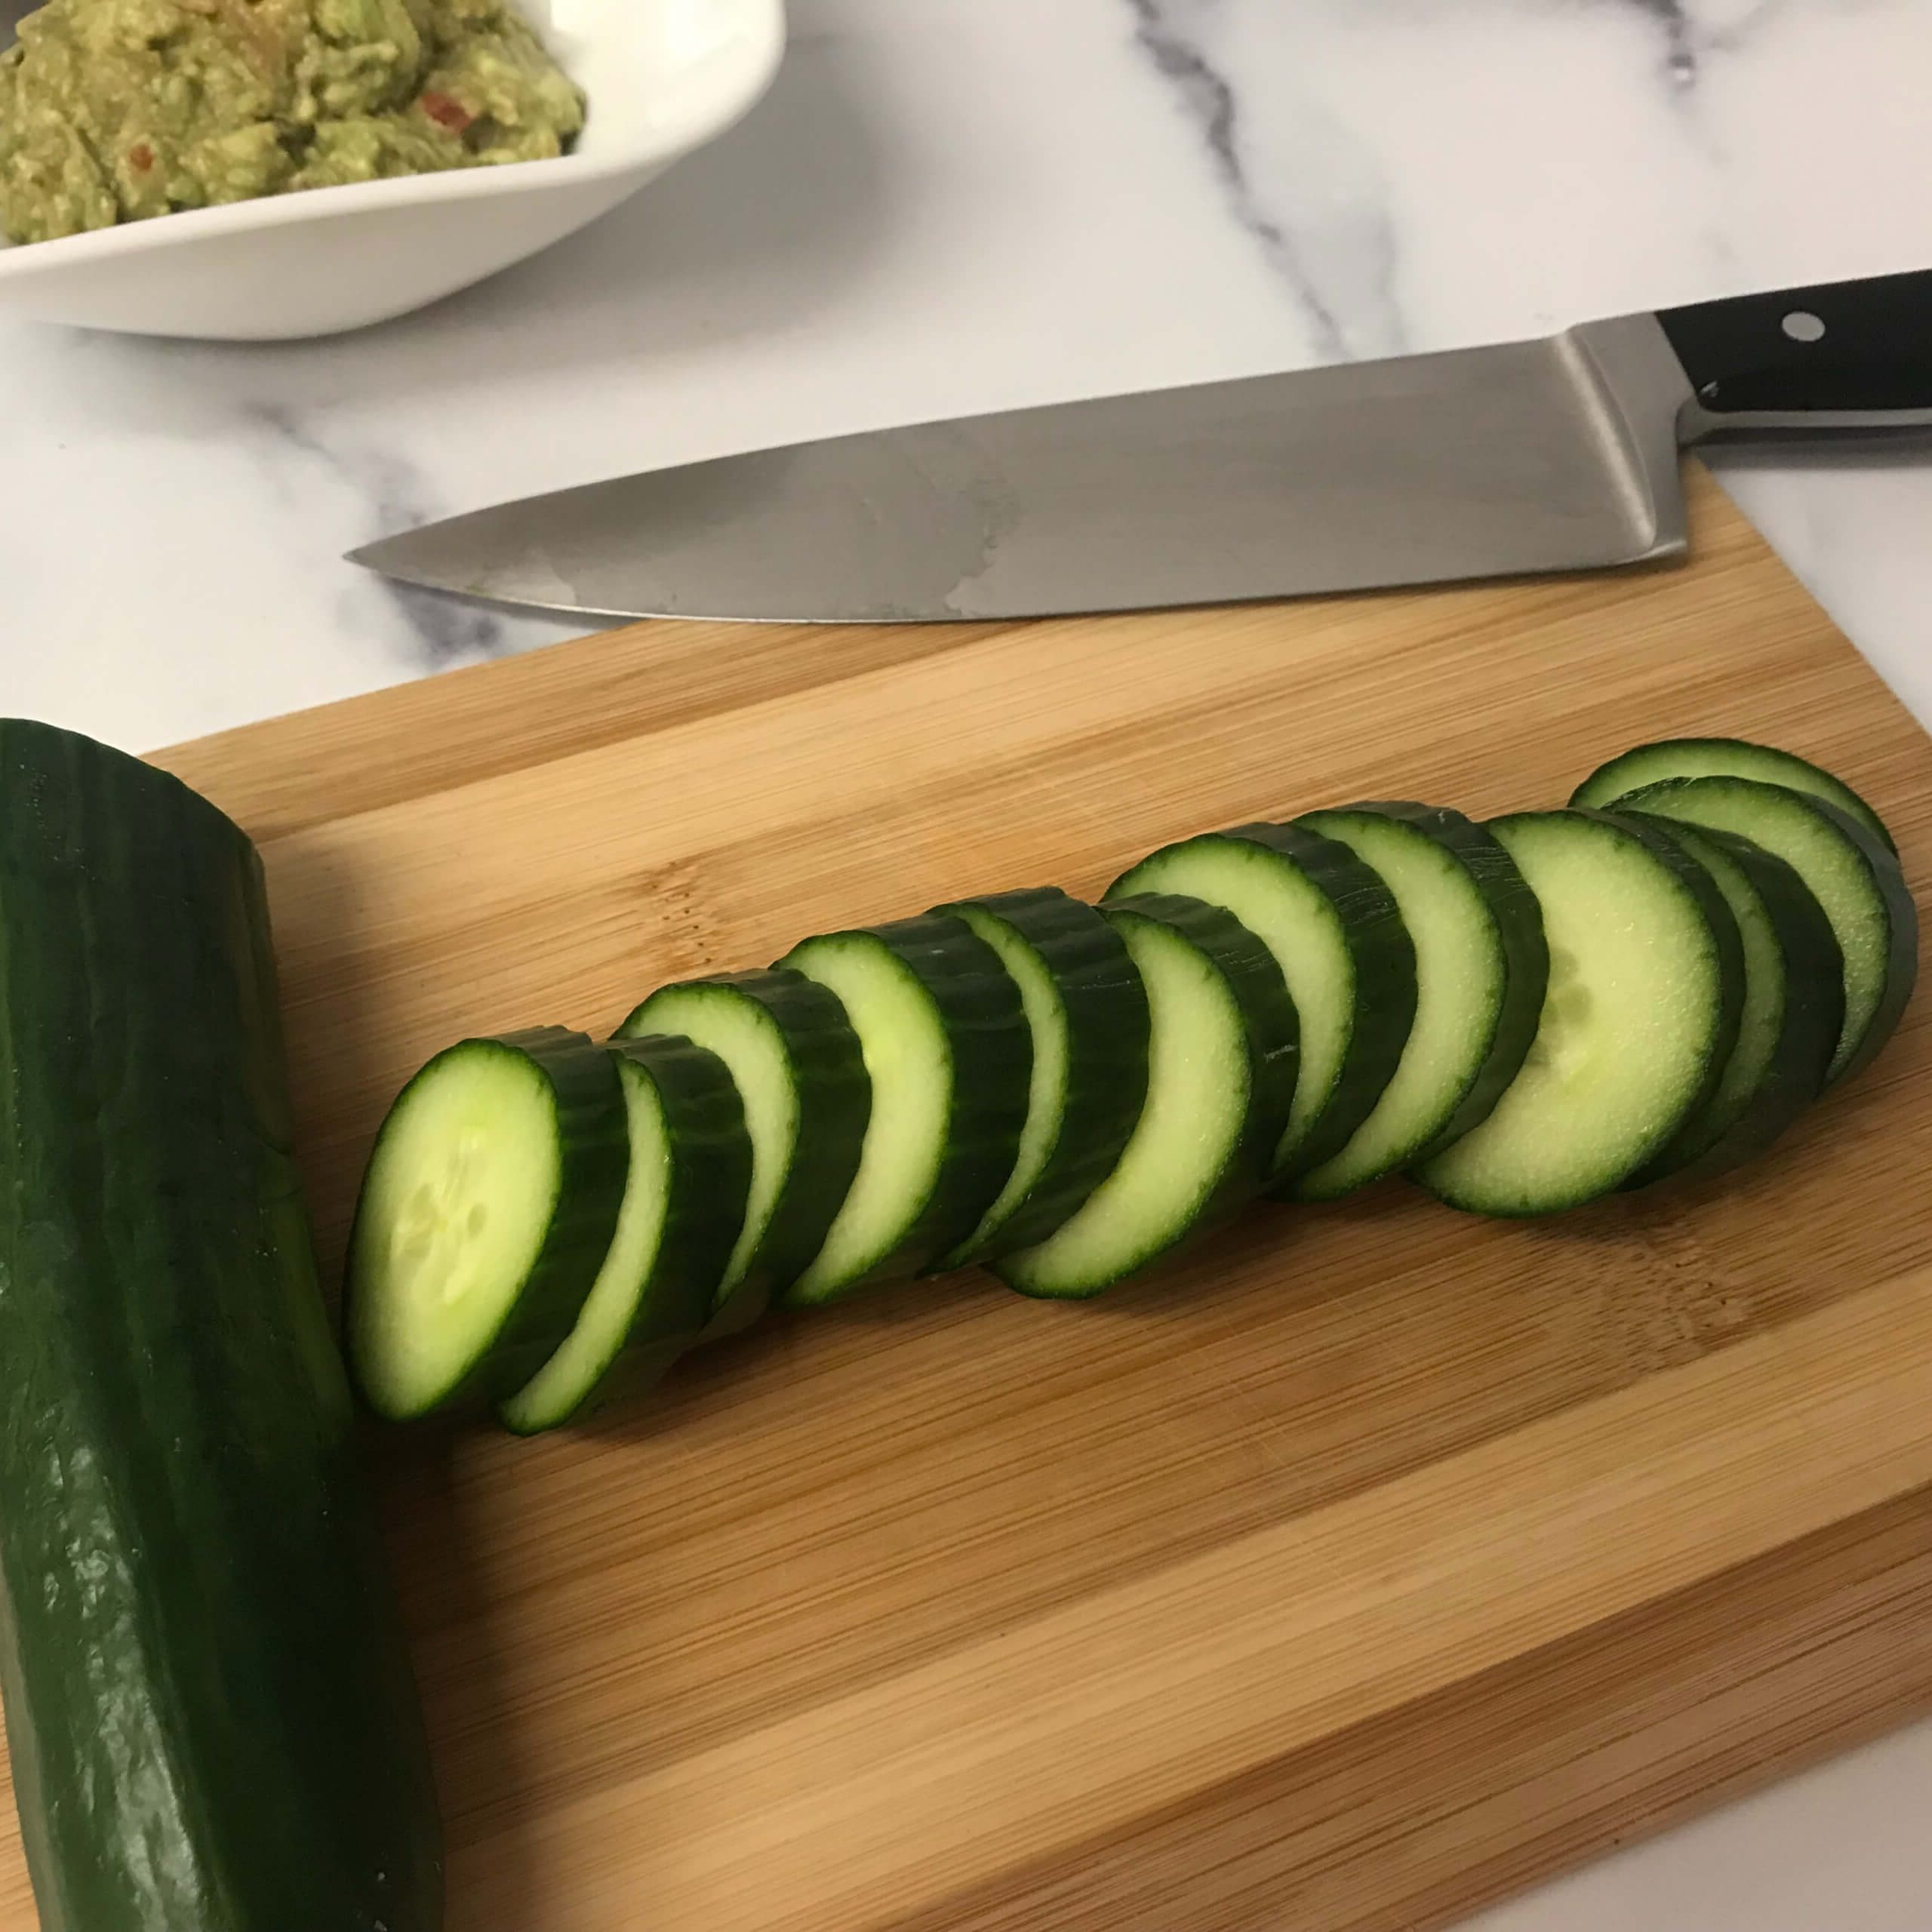 sliced cucumber on board | my curated tastes